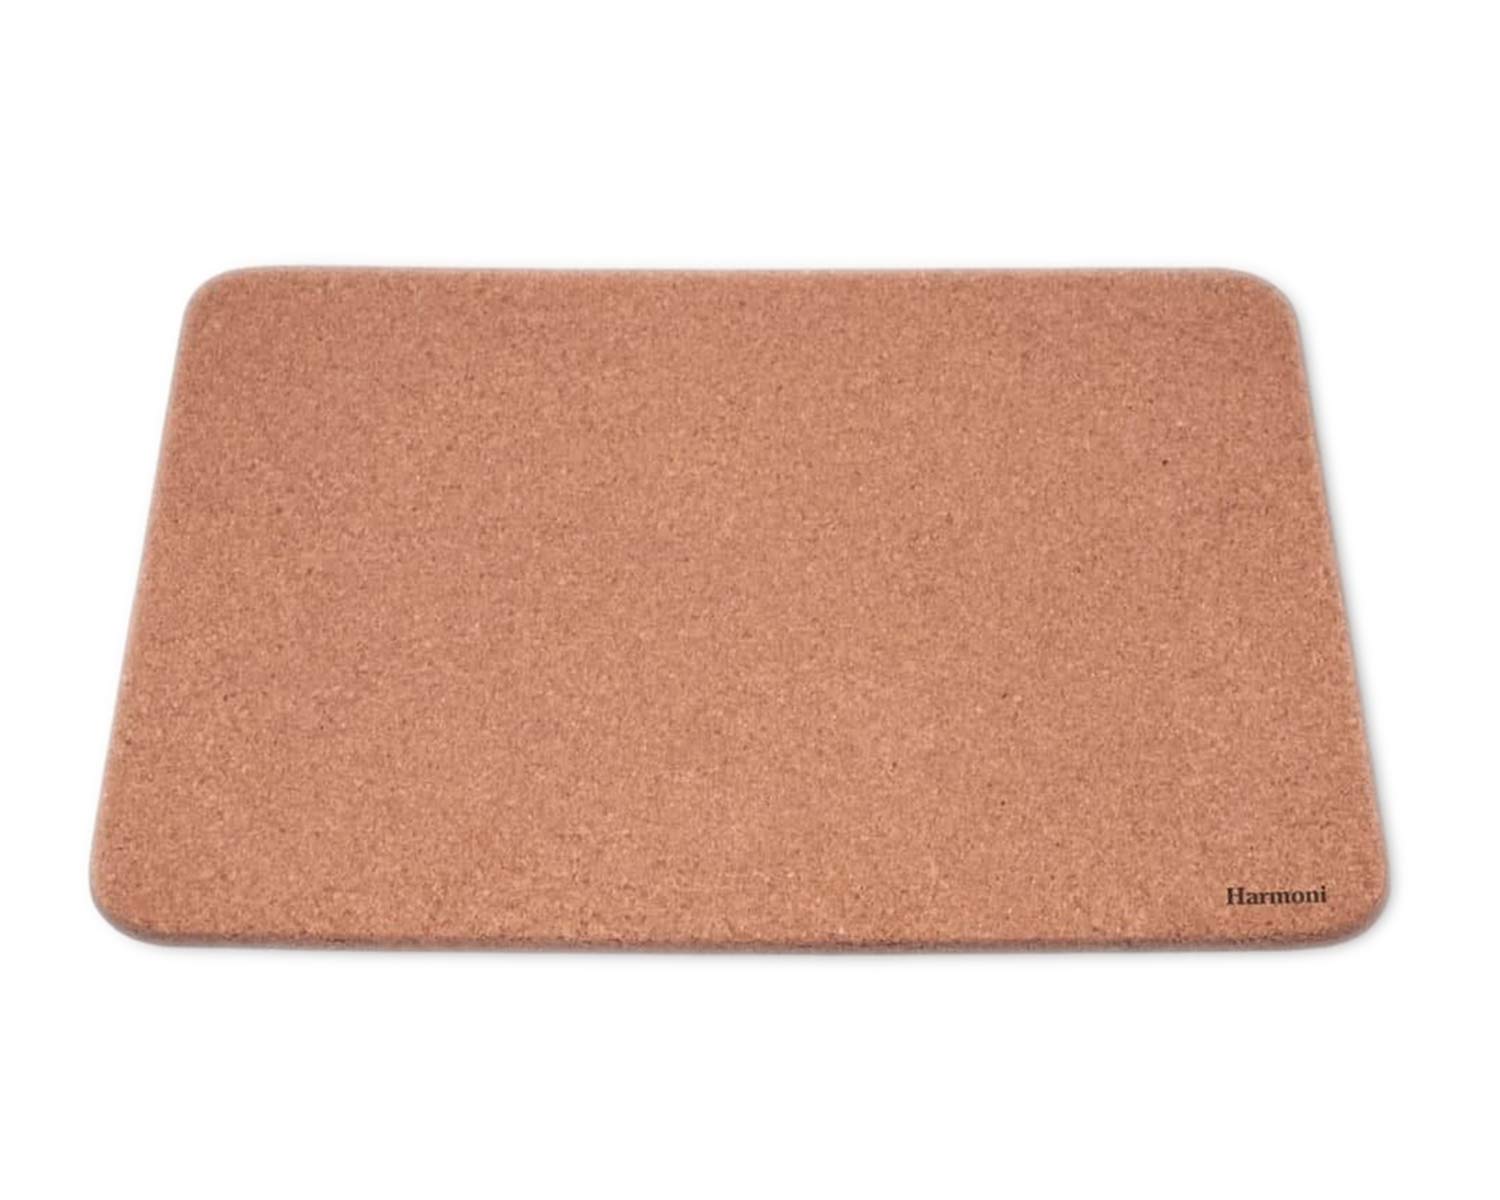 harmoni cork standing mat for home or the office